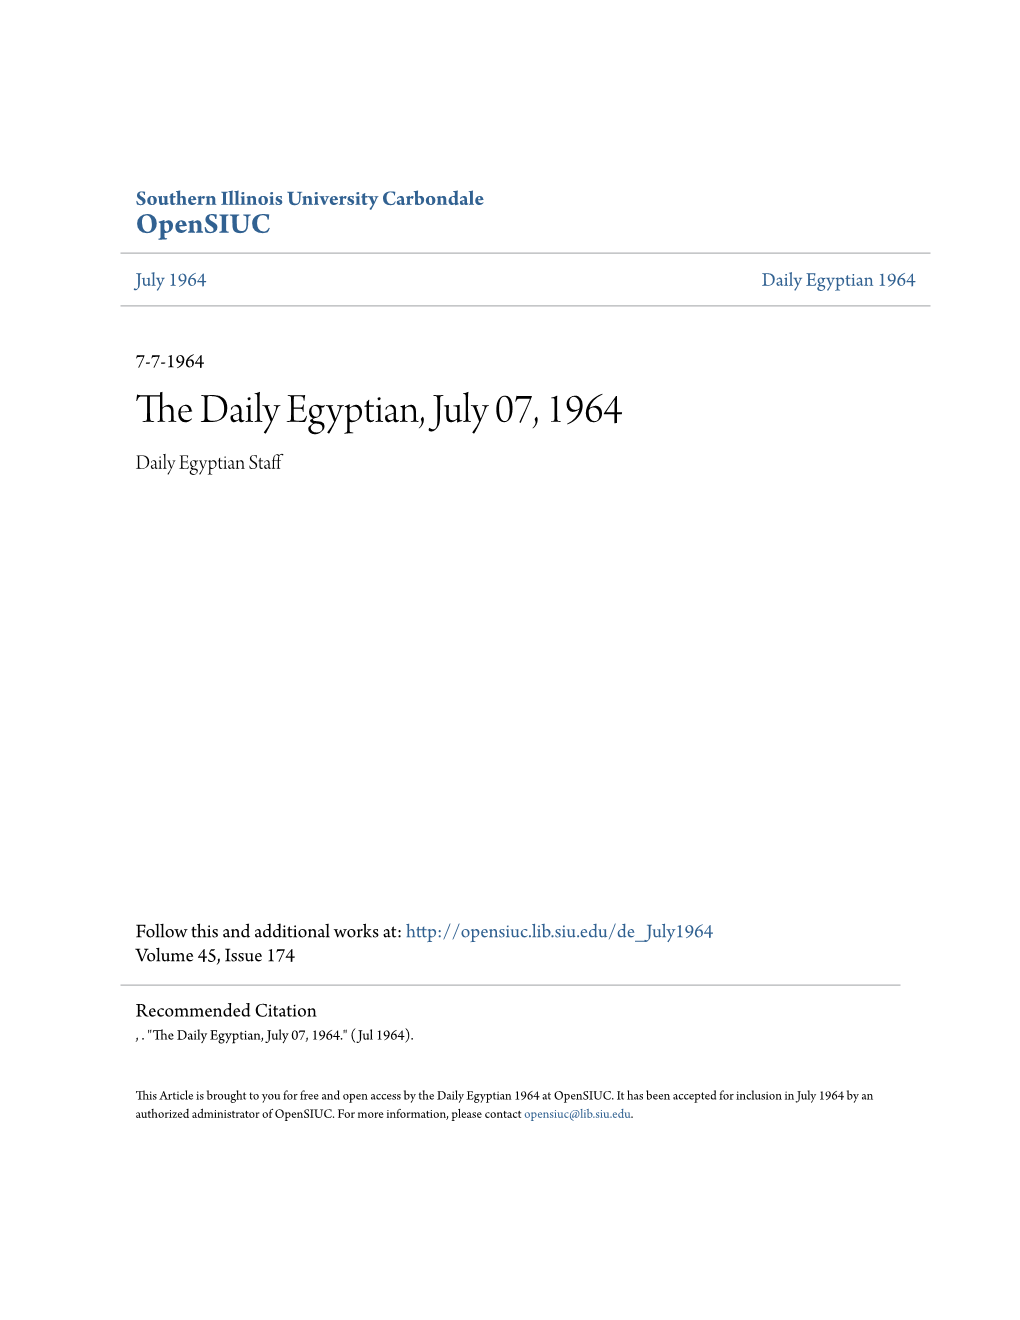 The Daily Egyptian, July 07, 1964